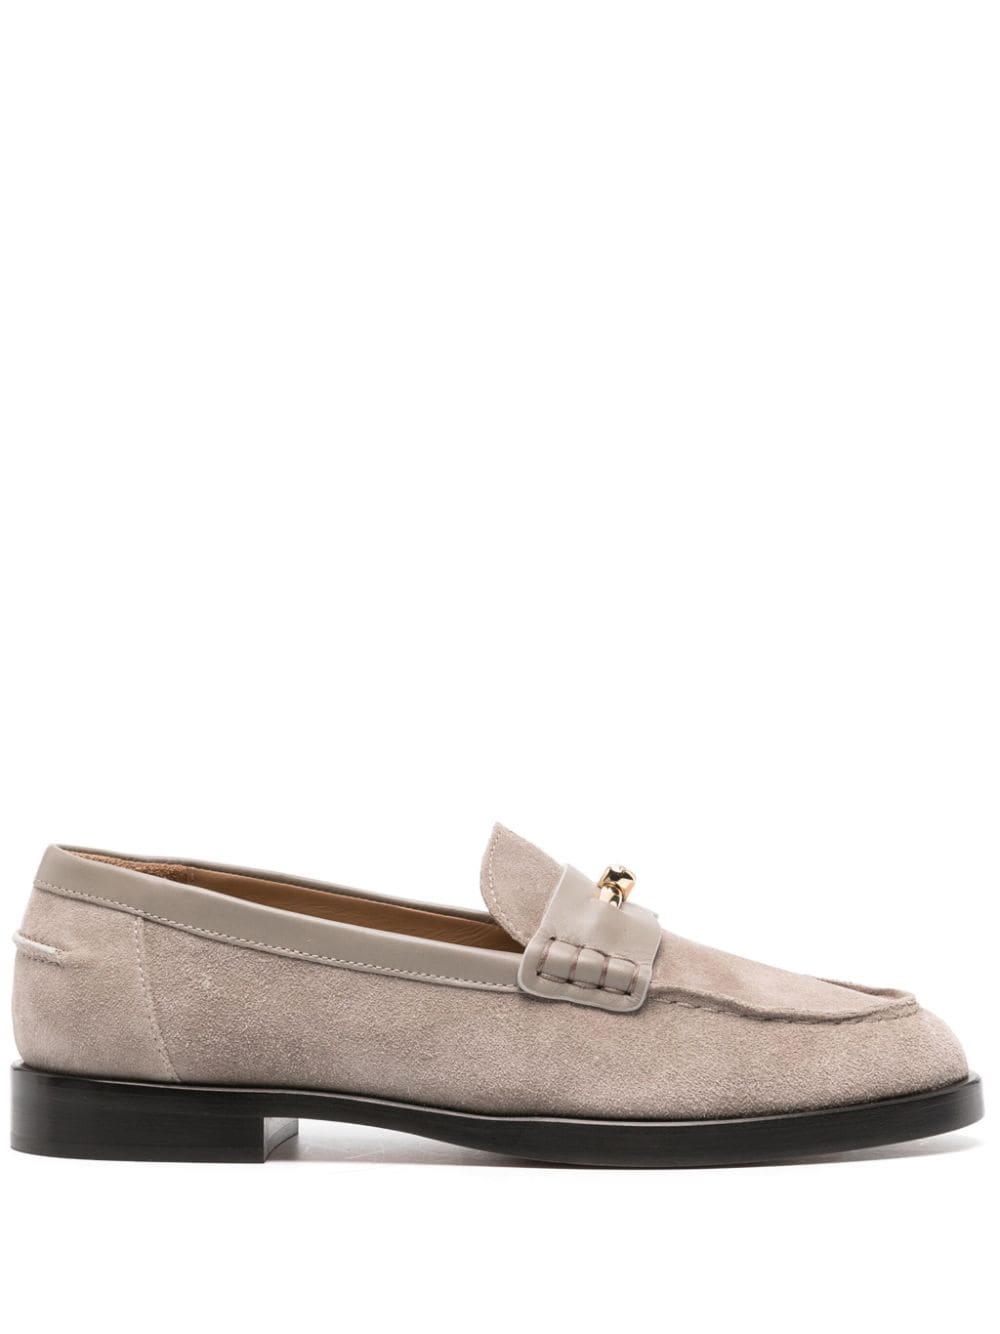 EMPORIO ARMANI MOC-STITCHING SUEDE LOAFERS